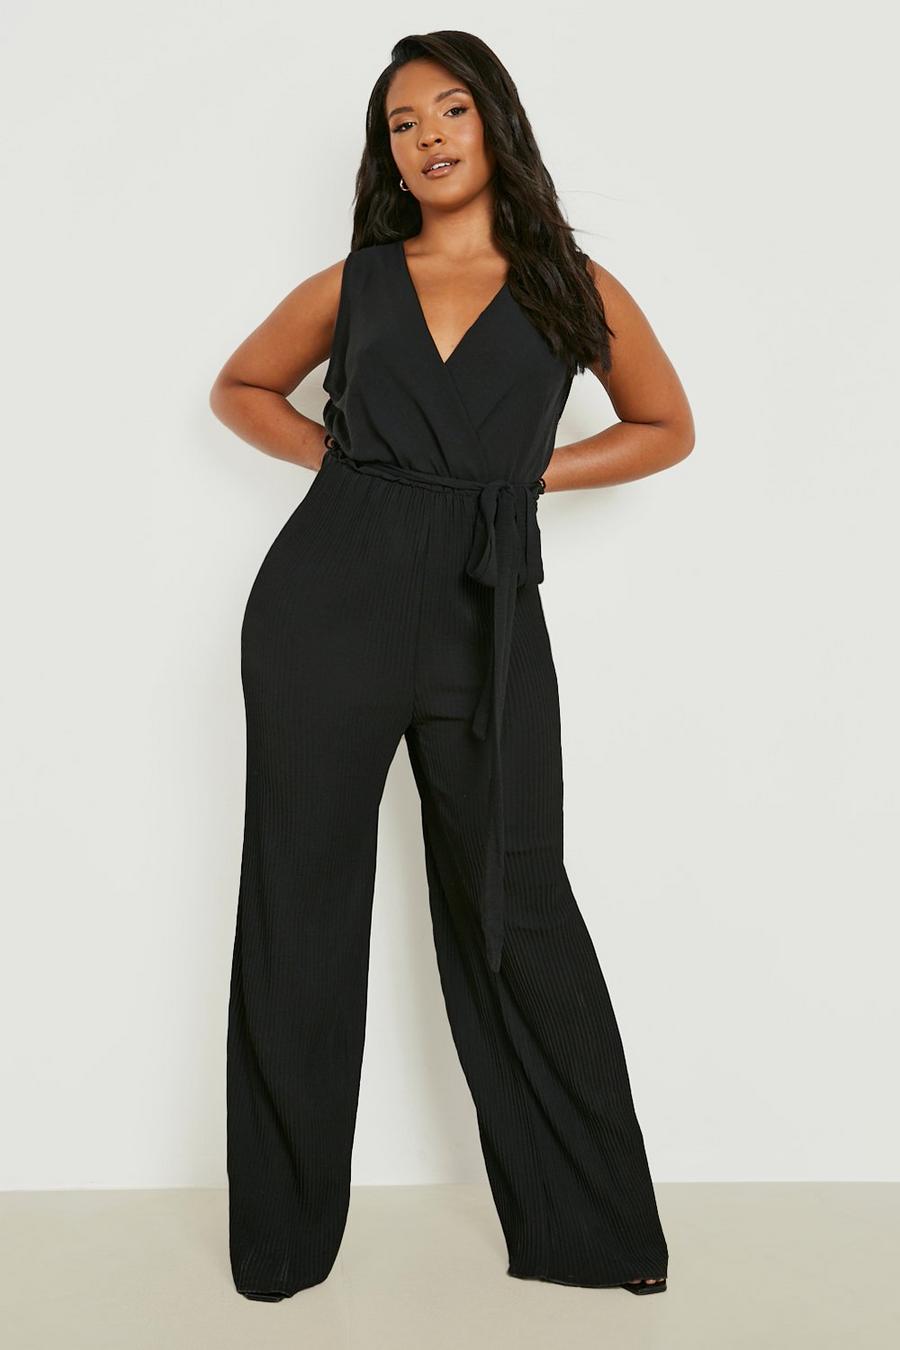 Plus Size Rompers | Plus Size Jumpsuits | boohoo Canada